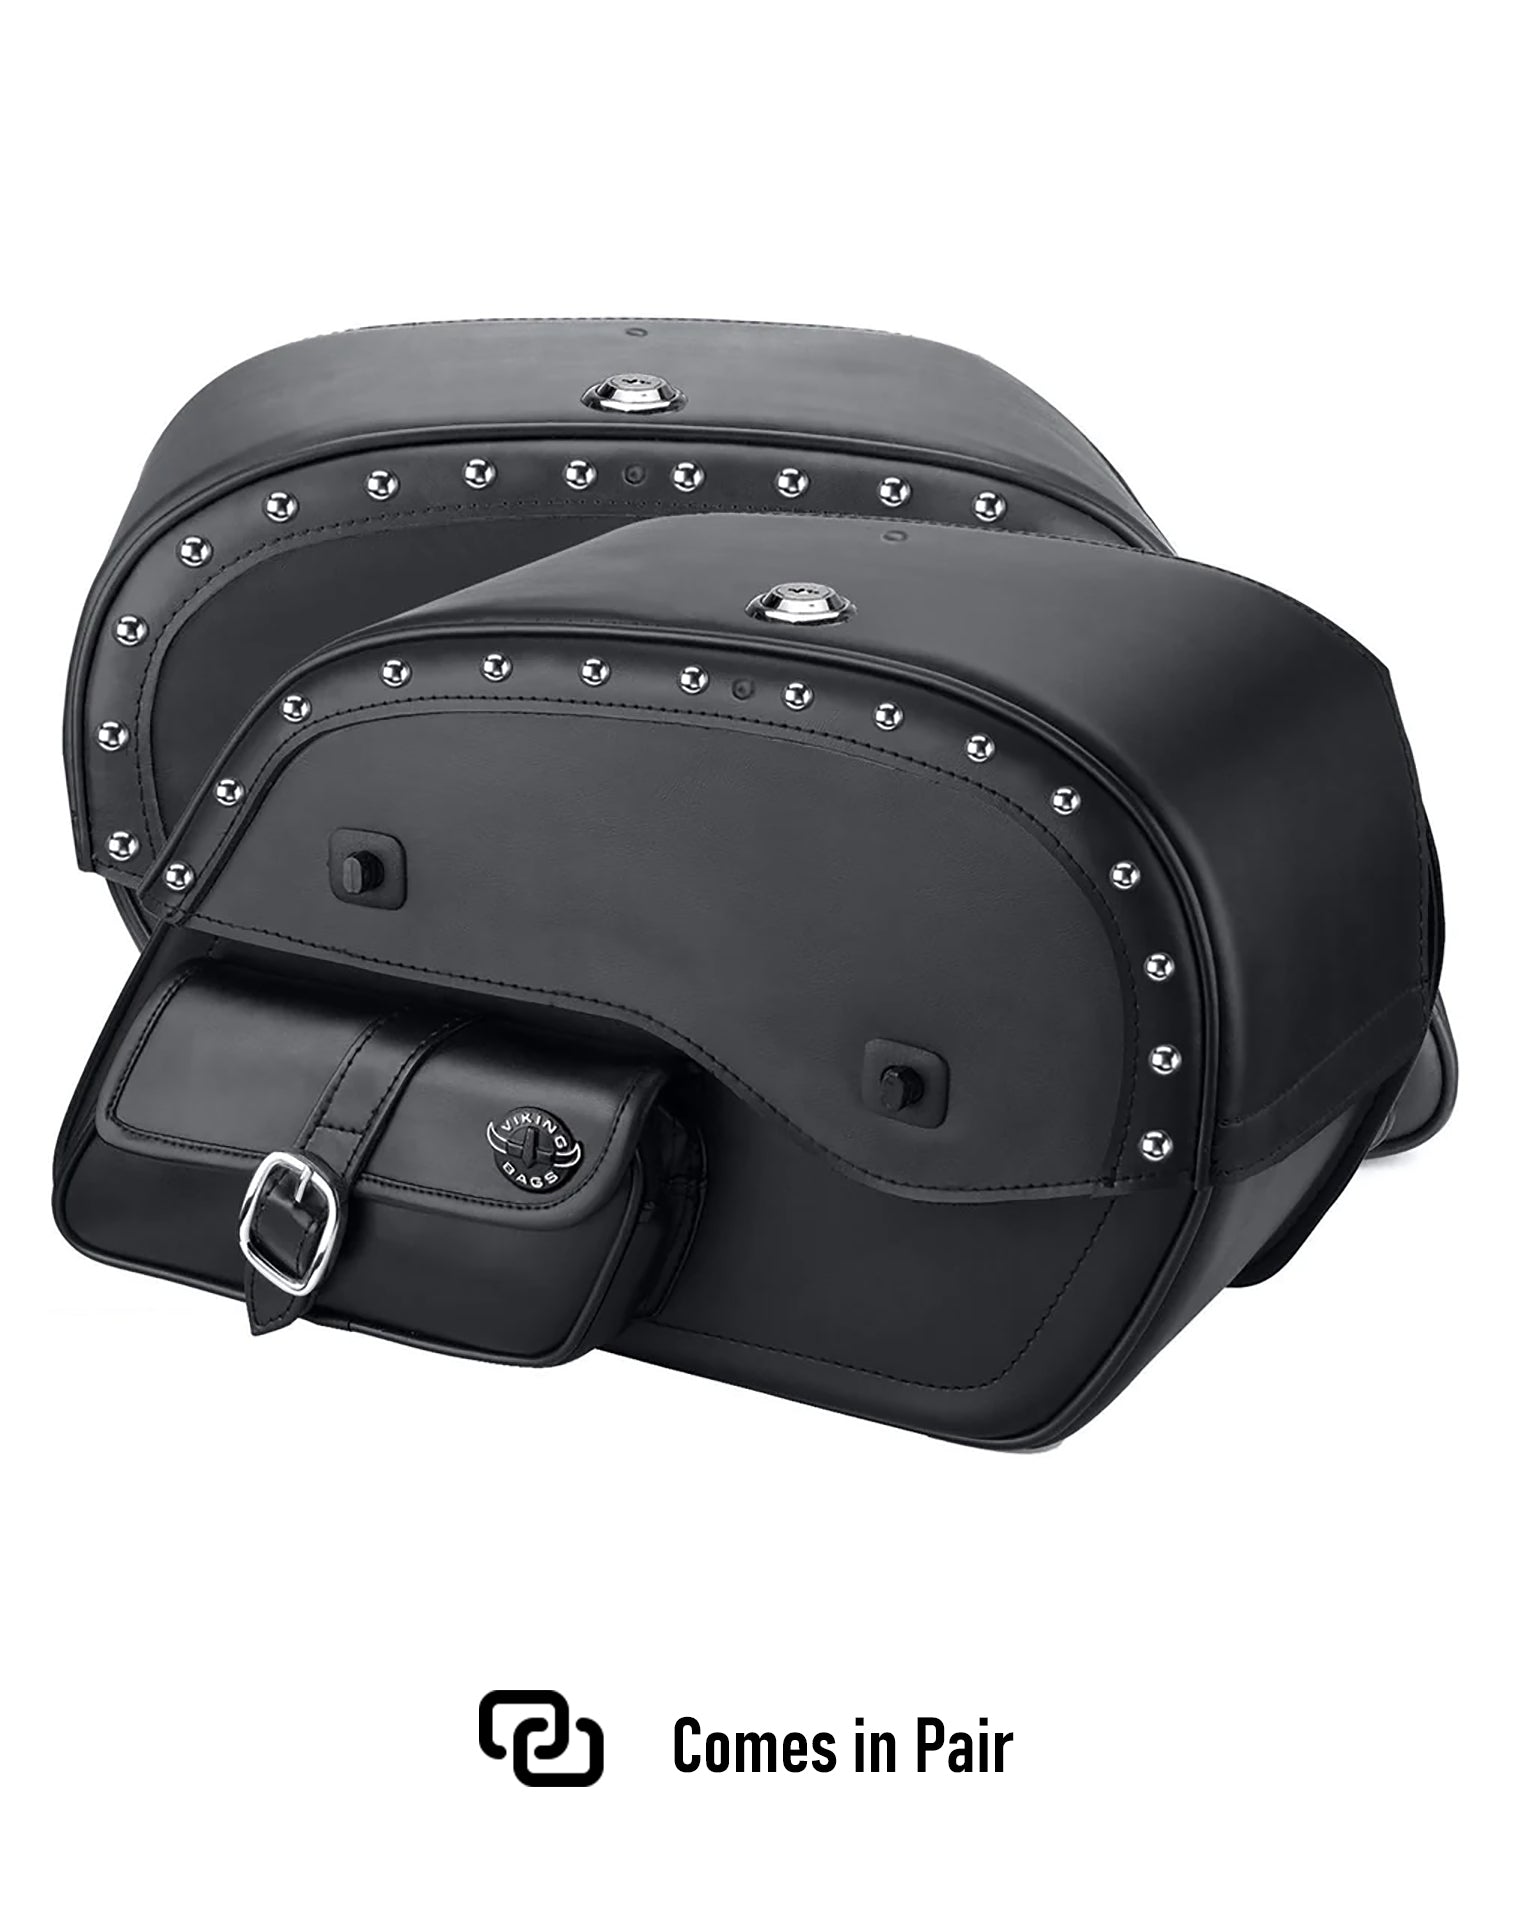 Viking Essential Side Pocket Large Kawasaki Vulcan 750 Vn750 Leather Studded Motorcycle Saddlebags Comes in Pair